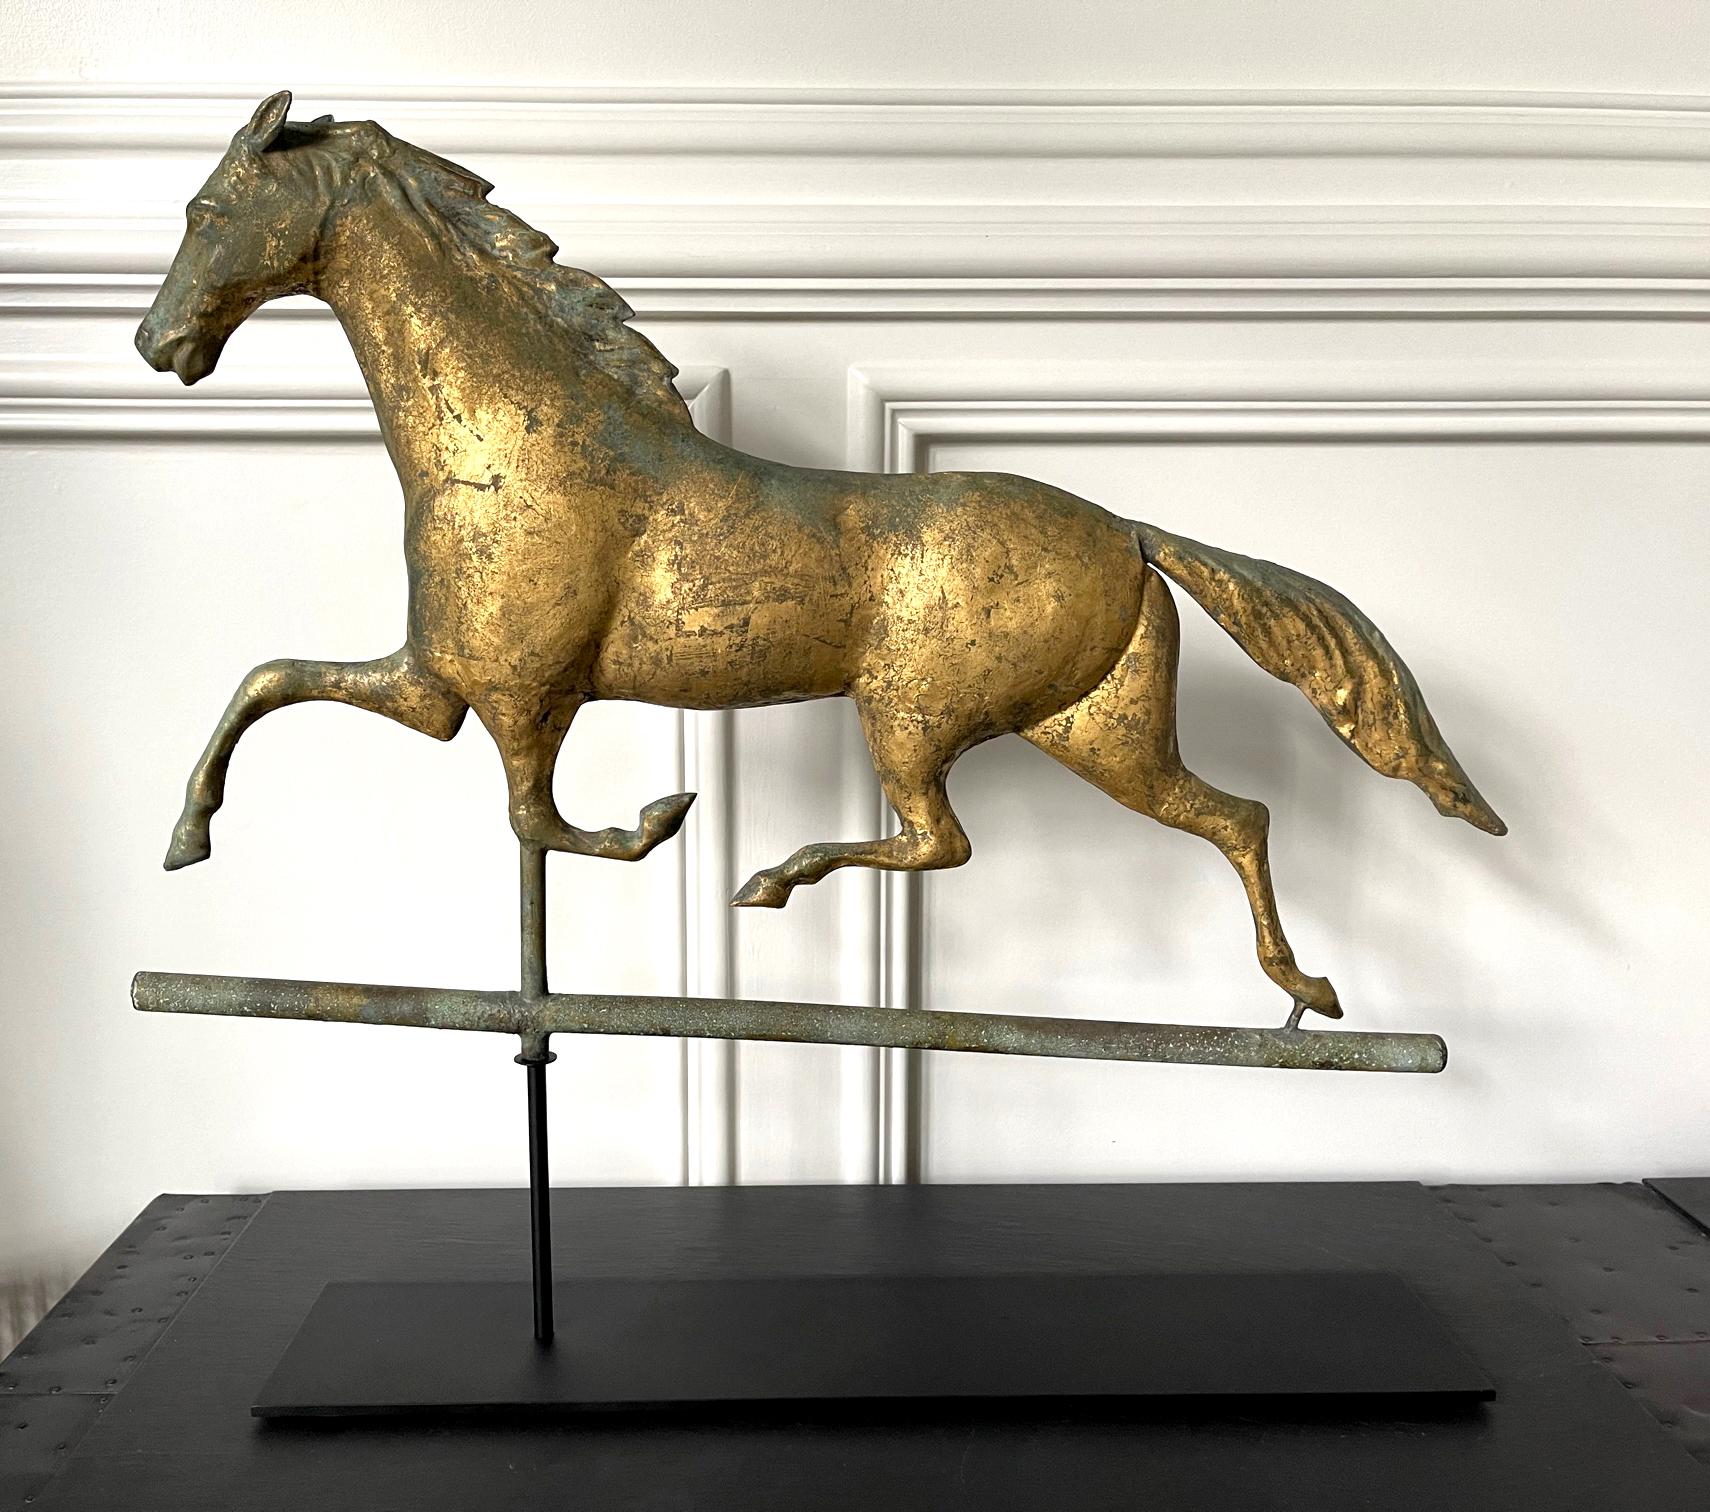 A trotting horse weathervane likely modeled after 